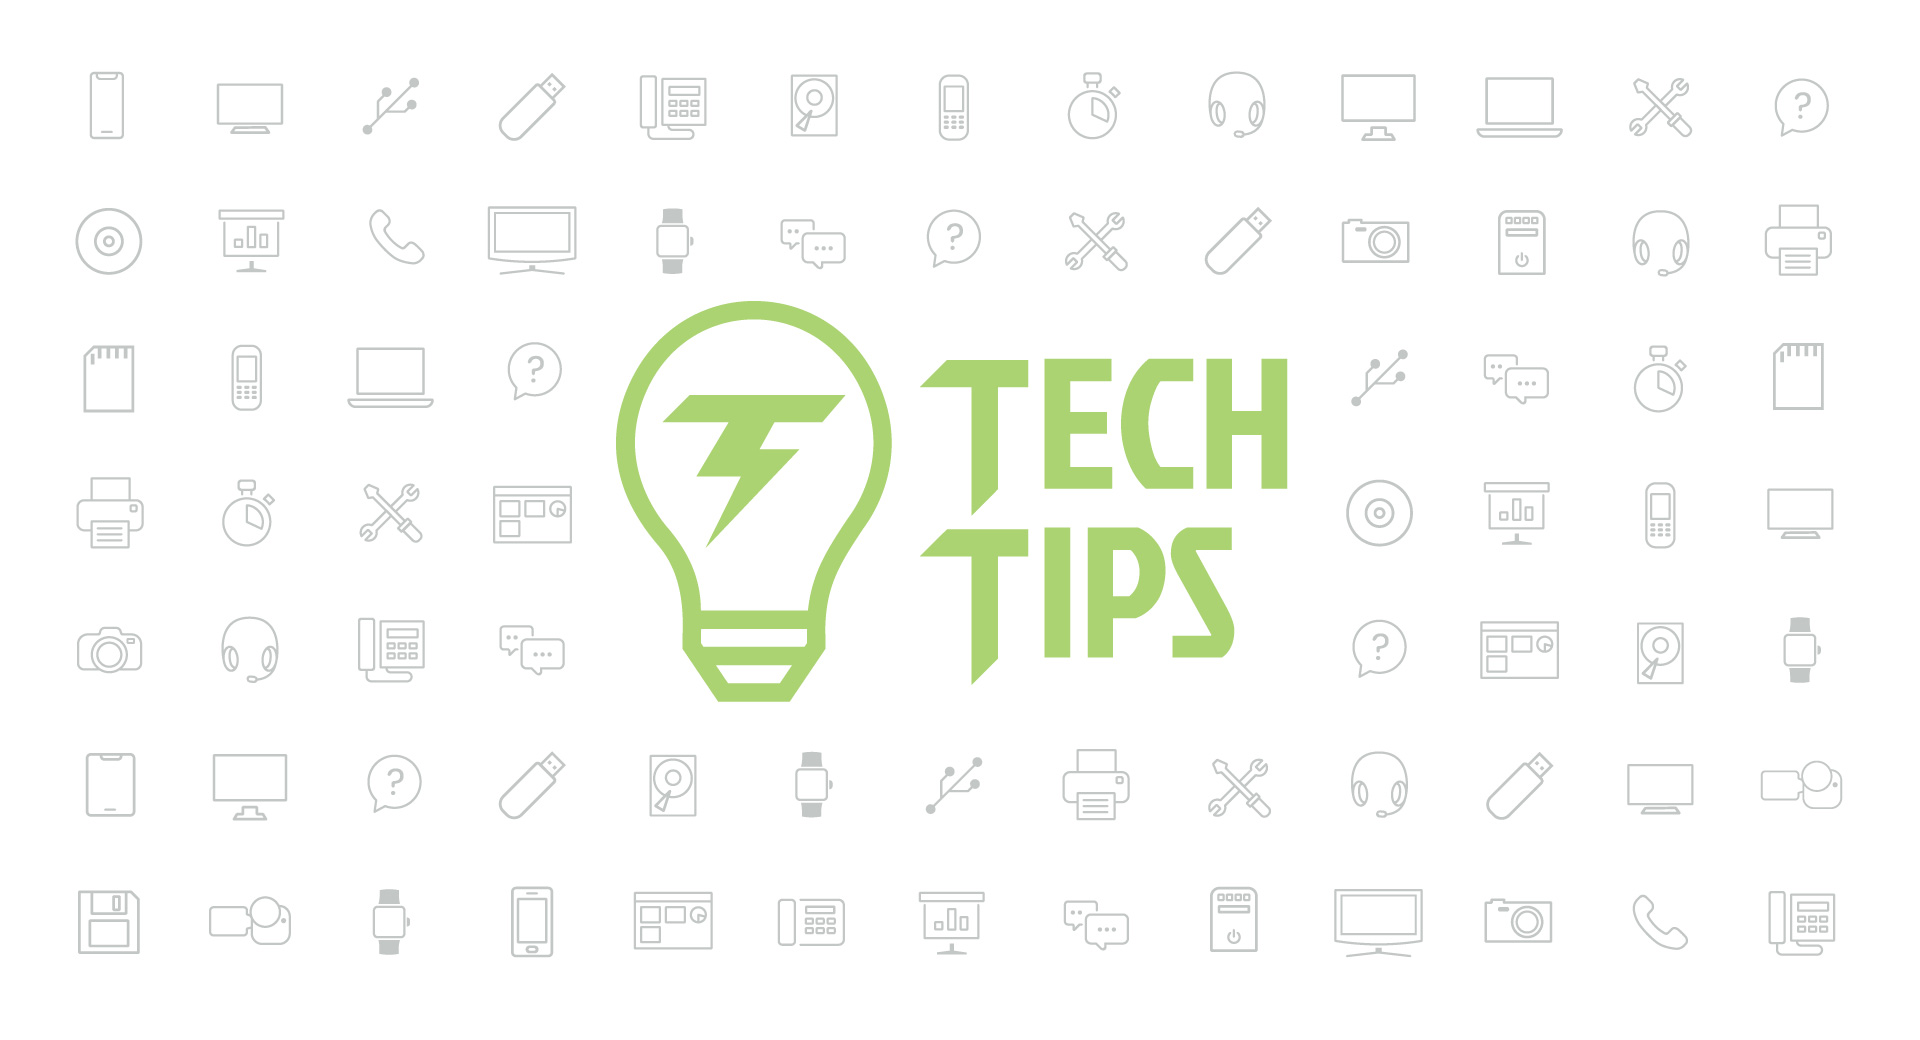 Technology Tips: July 2021 Edition